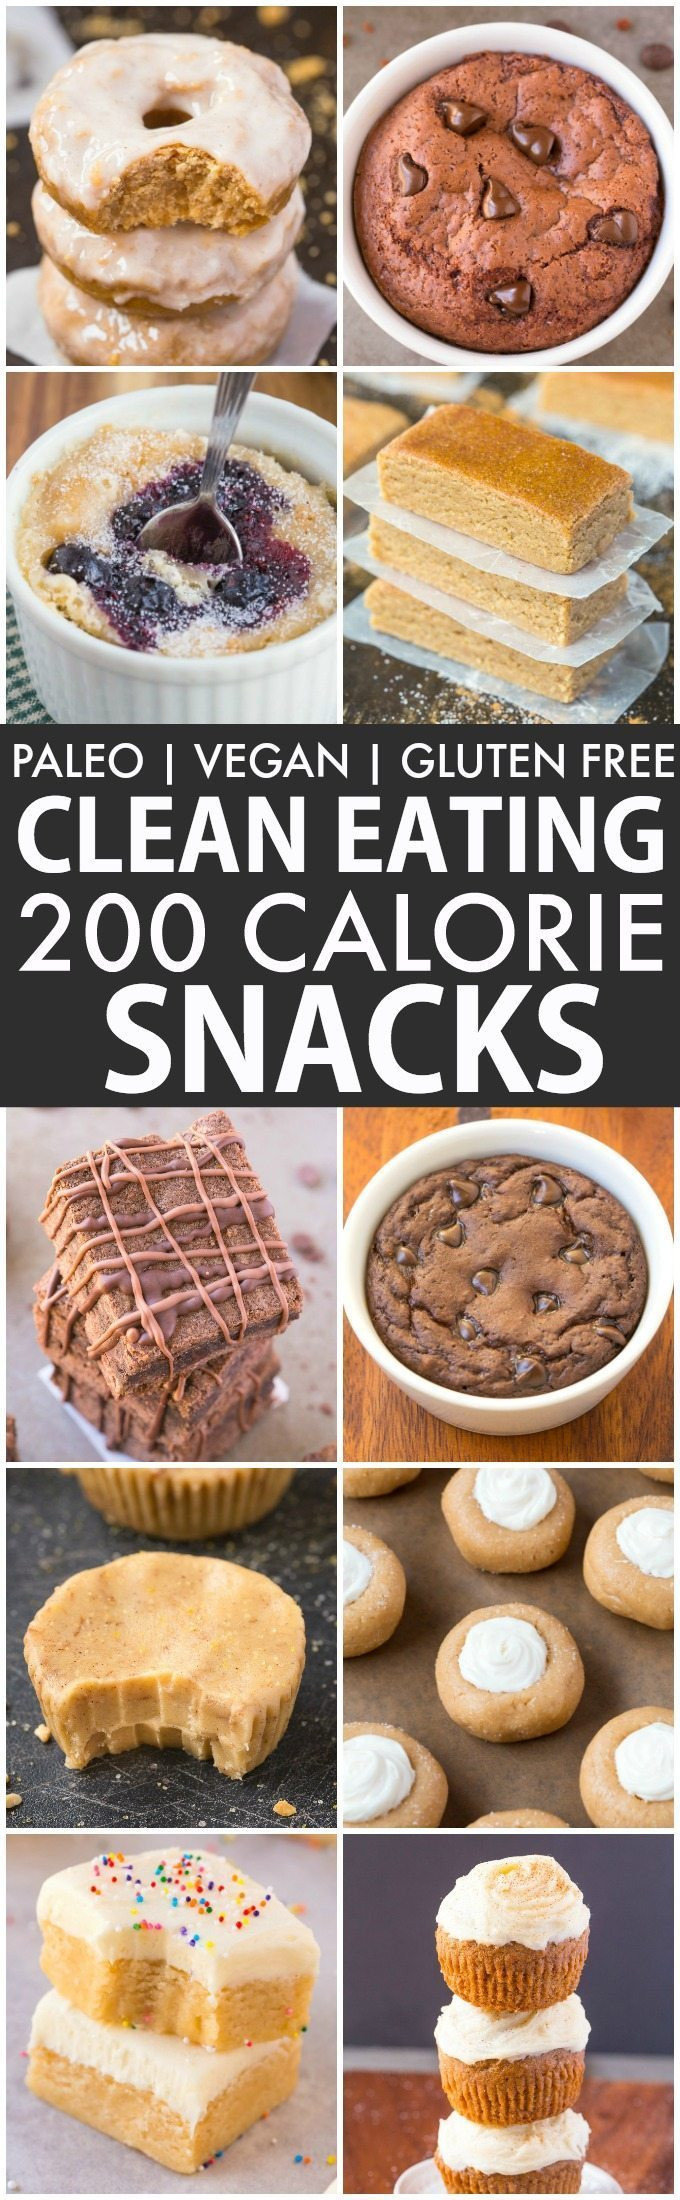 Healthy But Filling Snacks
 15 Healthy Desserts and Snacks Under 200 Calories